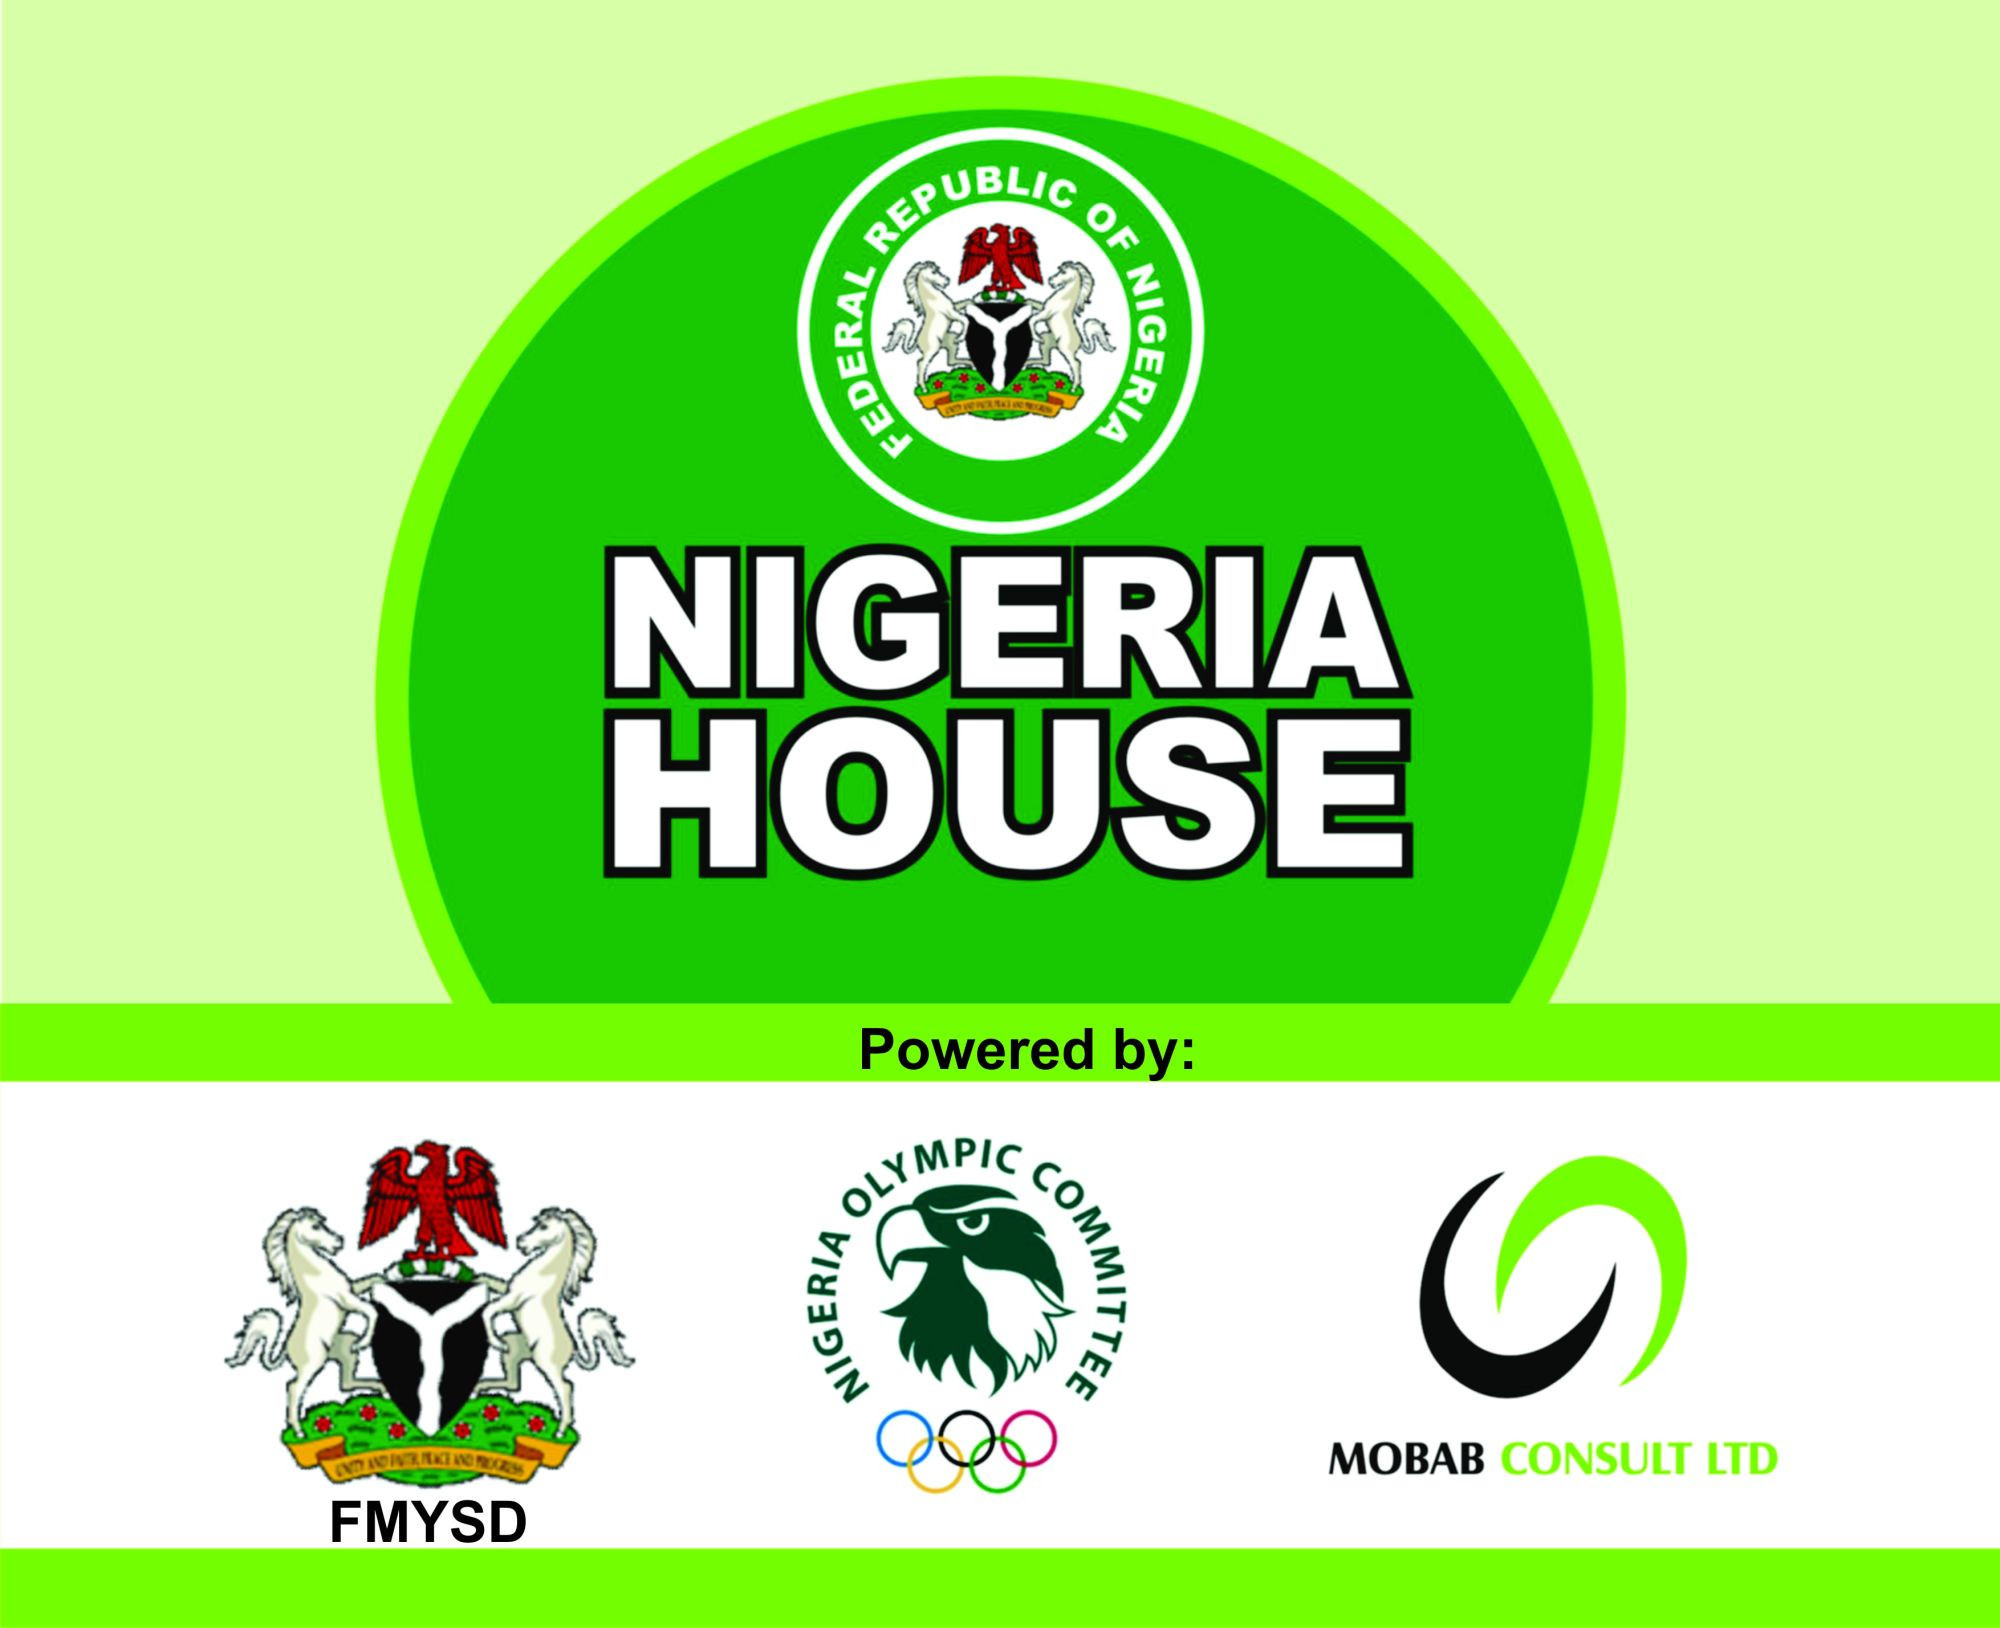 Nigeria Olympic Committee to review Tokyo 2020 House project after leadership sacked